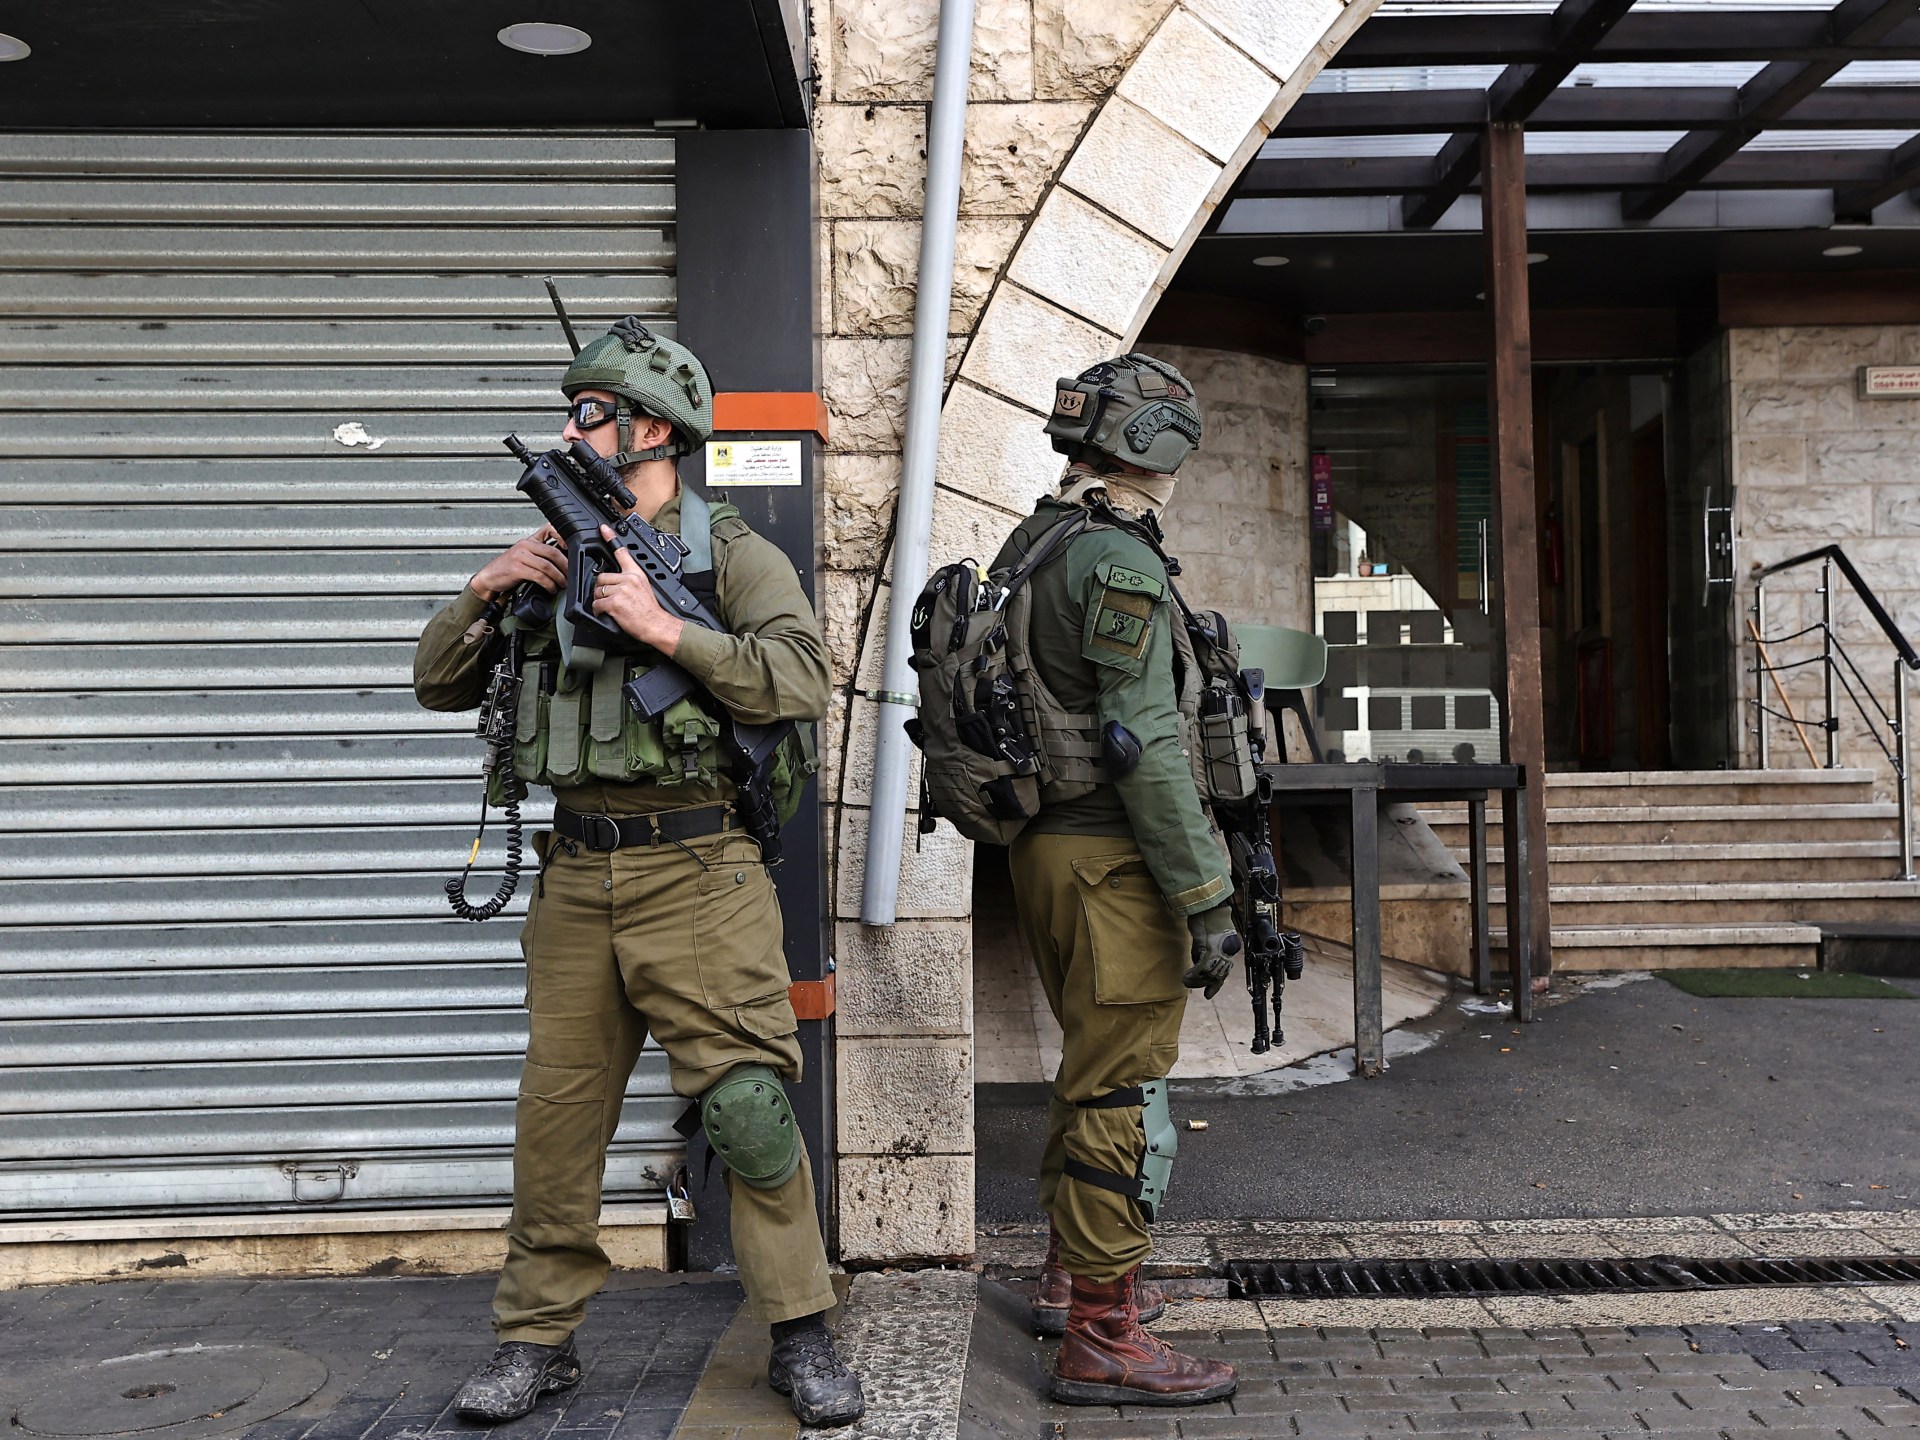 Two young Palestinians shot dead by Israeli forces in West Bank | Israel-Palestine conflict News